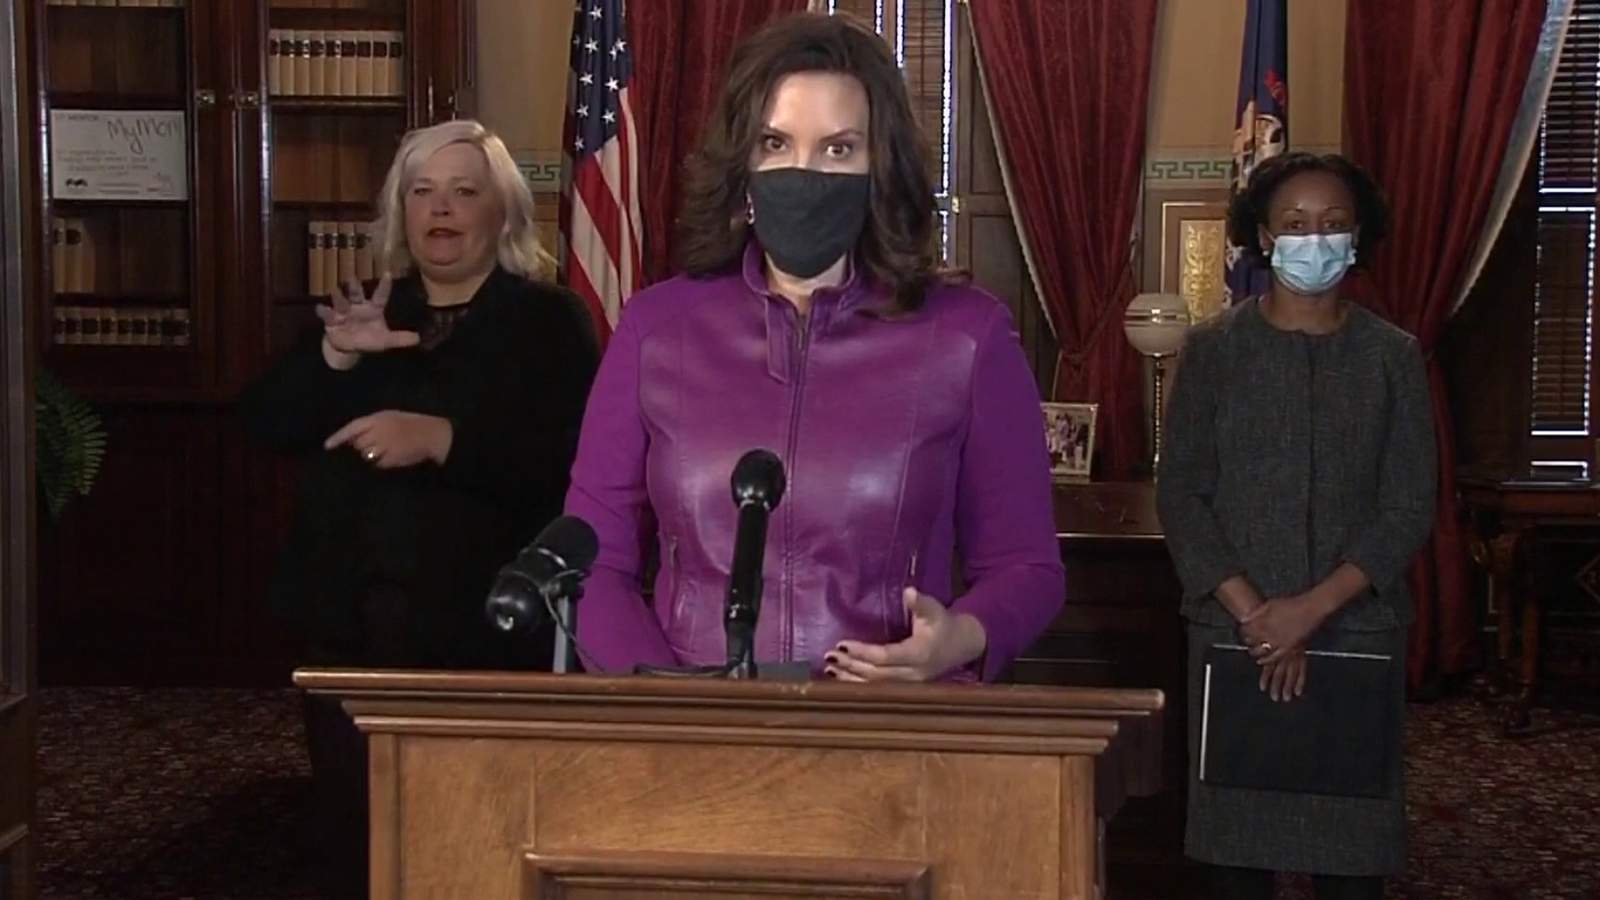 Whitmer on Michigan COVID restrictions: ‘I think it’s very clear the pause has worked’